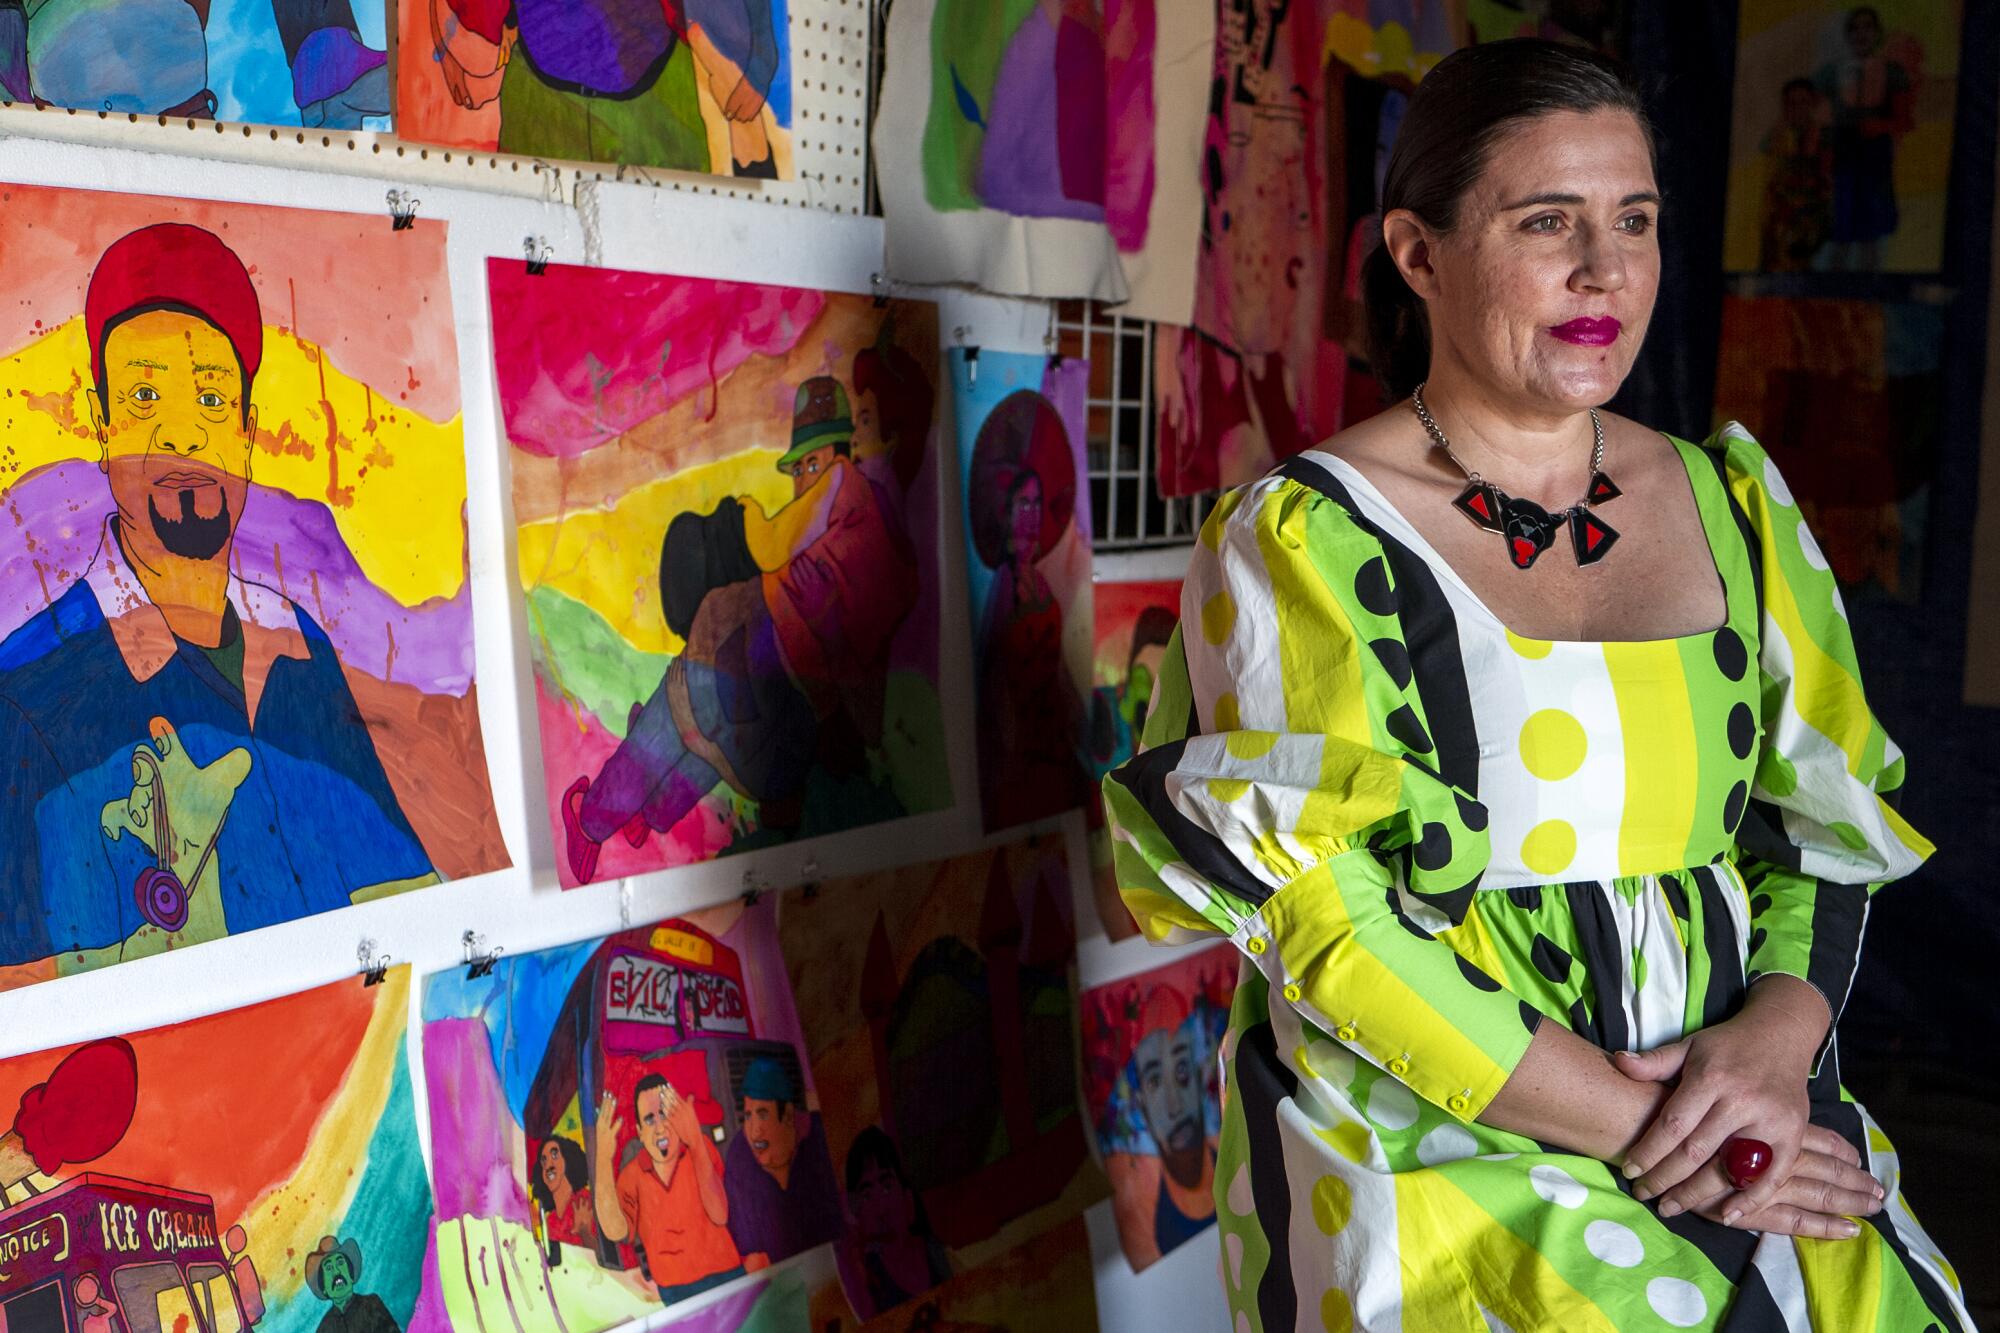 Karla Diaz, wearing a bright dress with a green and black geometric print, sits beside her watercolor paintings.